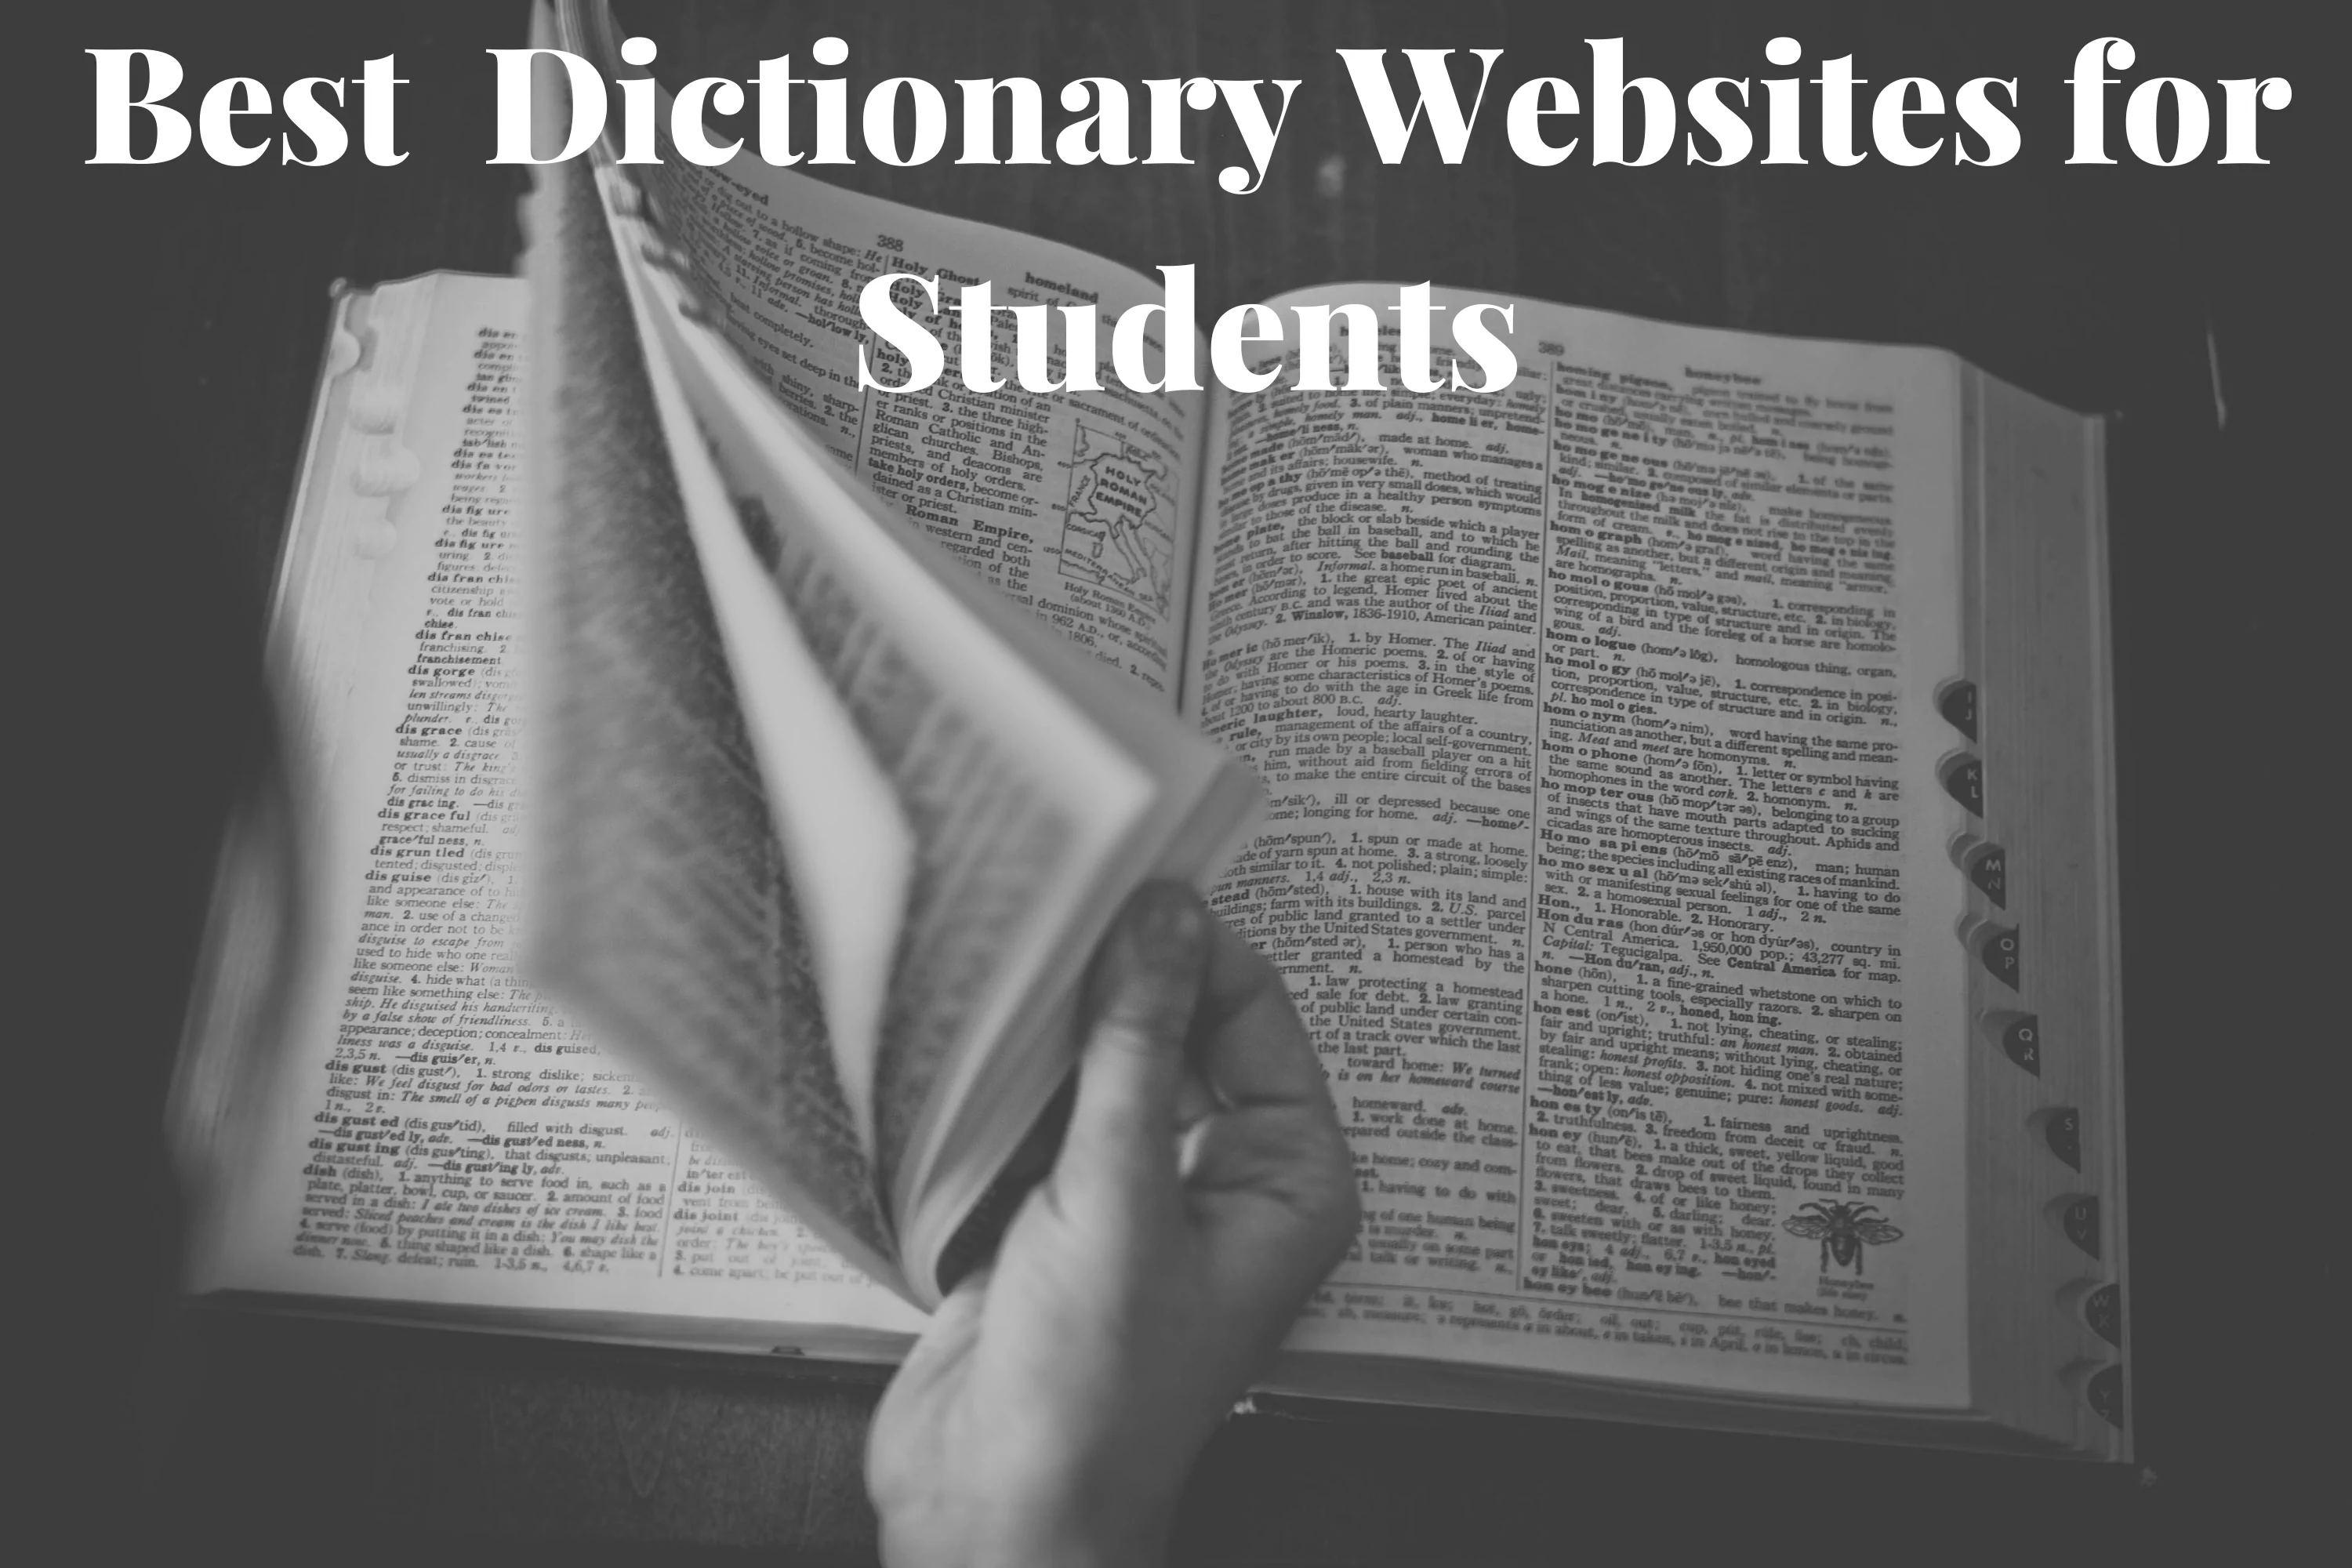 Online Dictionaries for Students